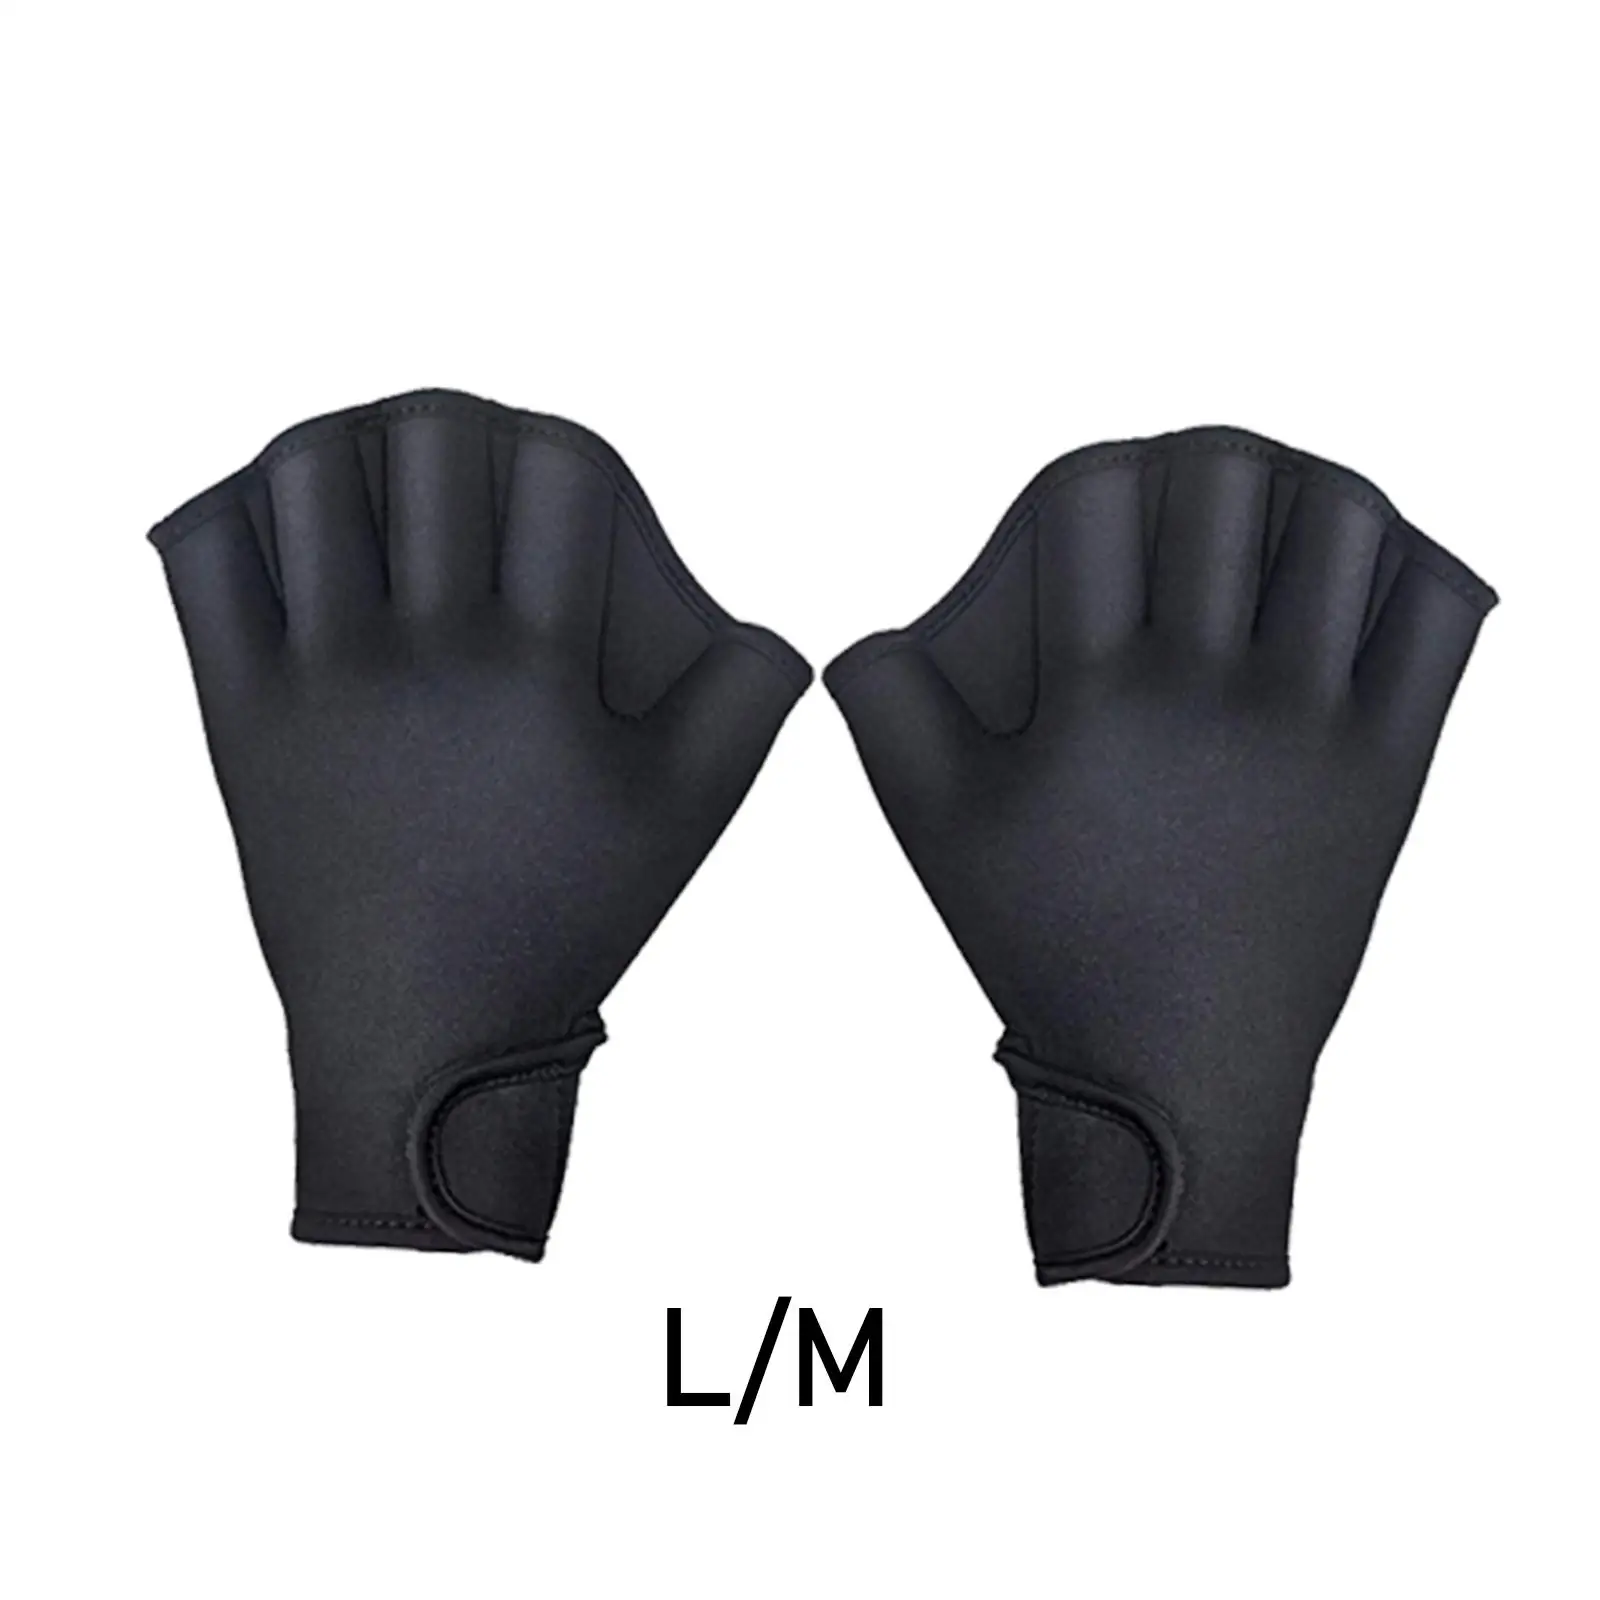 2x Swim Webbed Gloves Helping Upper Body Resistance for Paddle Training